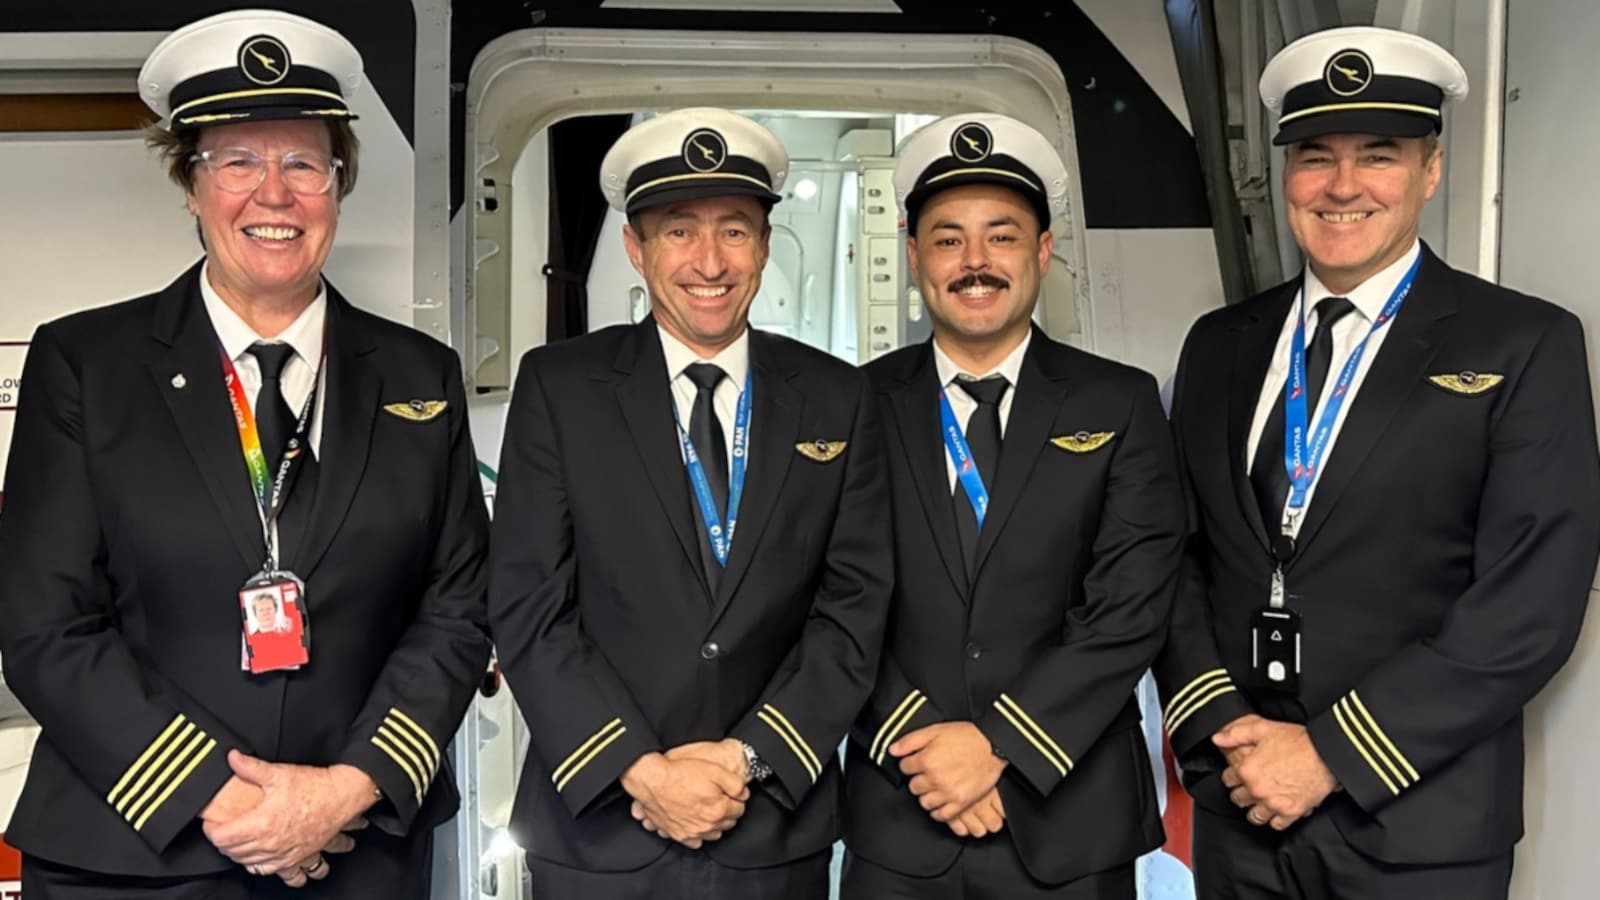 This Airline Allows Male Cabin Crew To